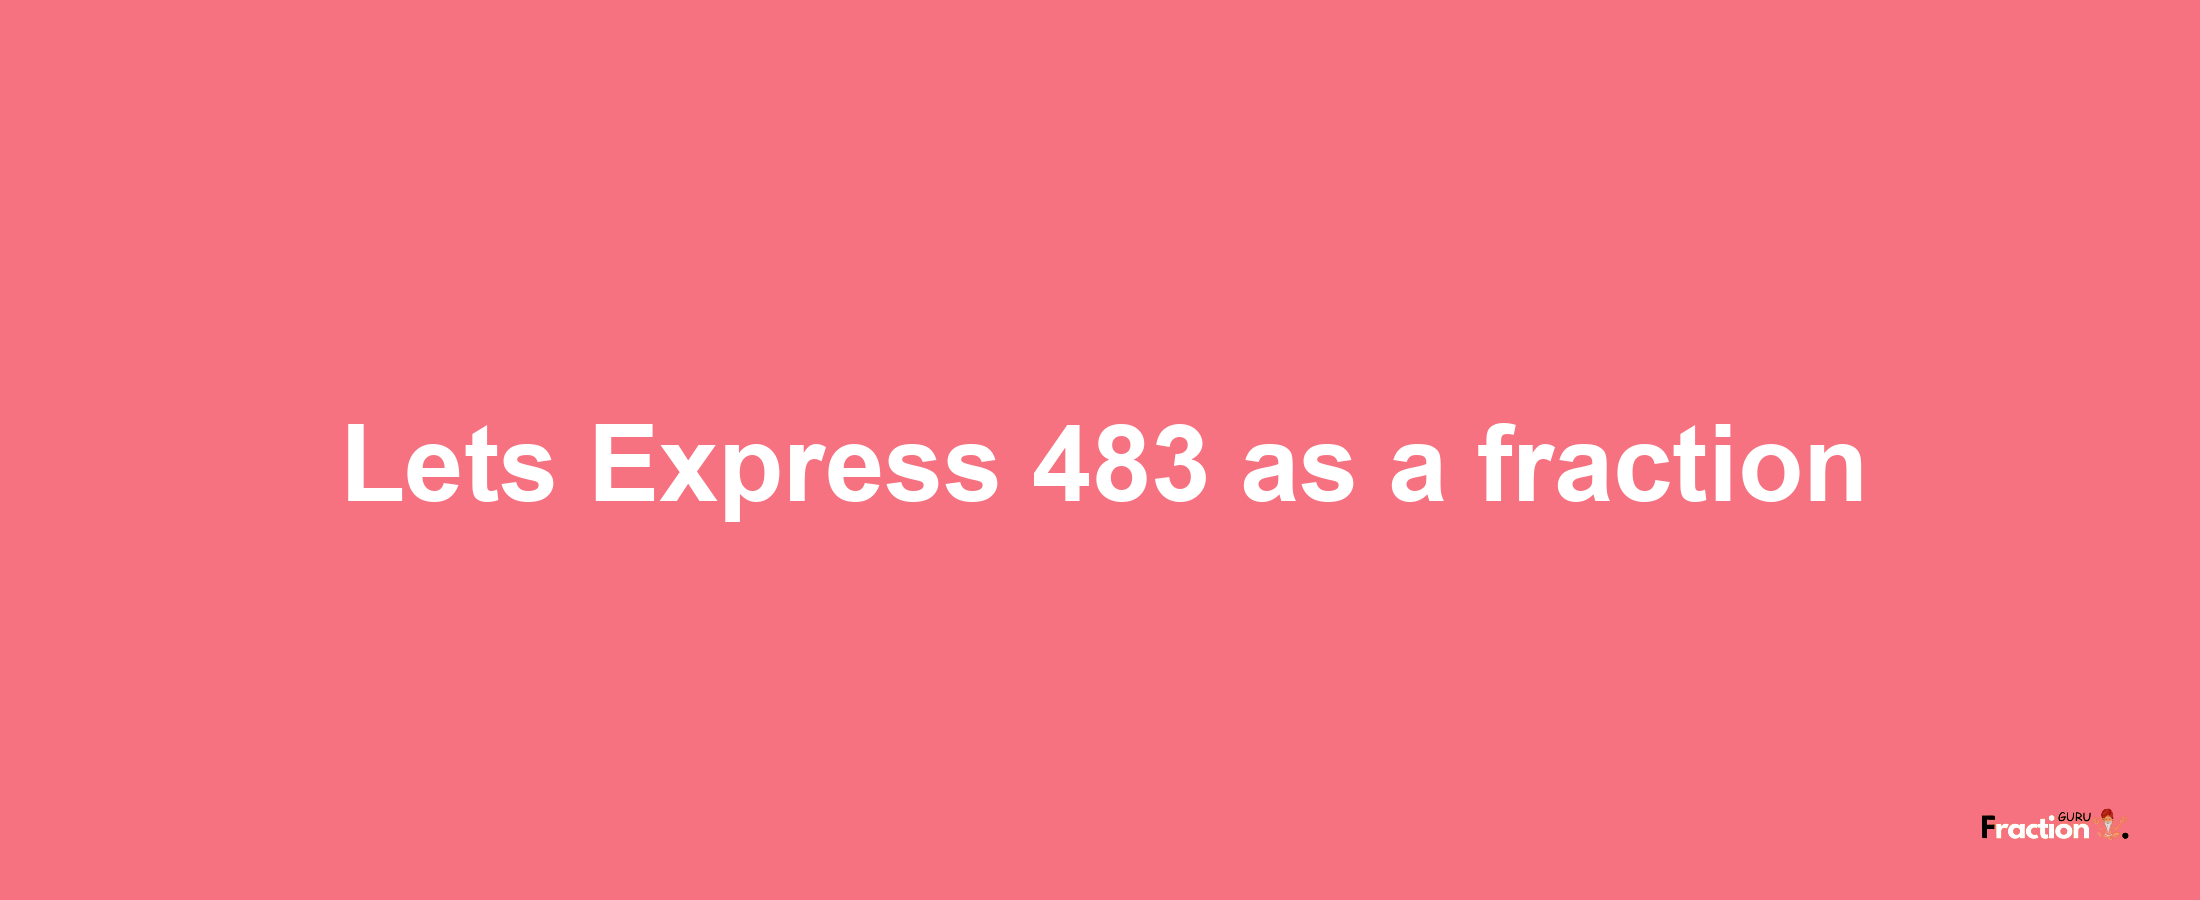 Lets Express 483 as afraction